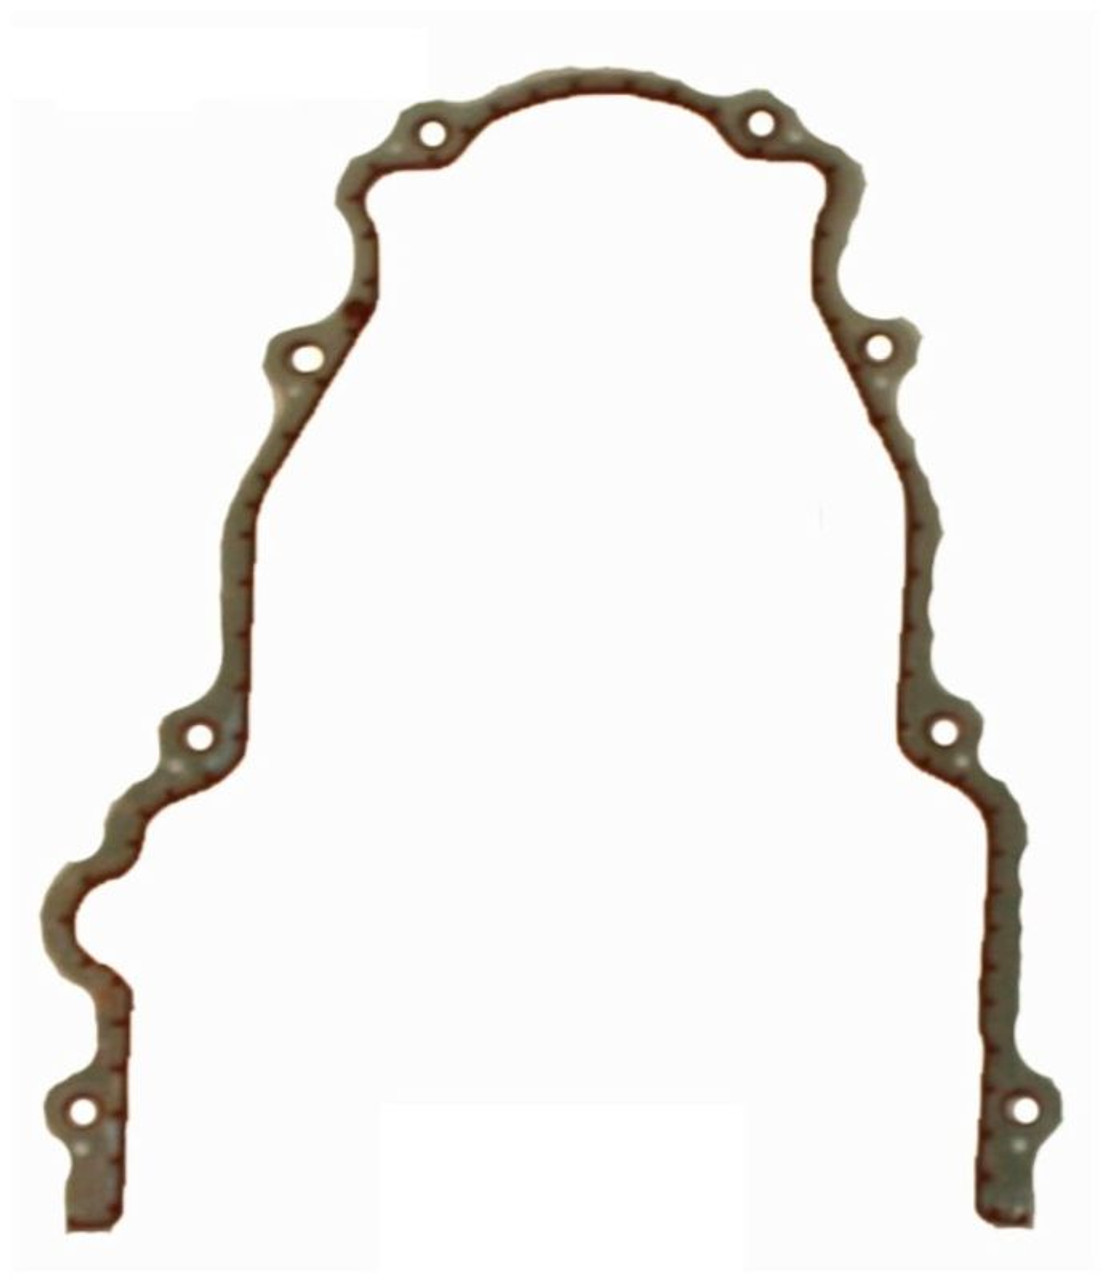 2003 Hummer H2 6.0L Engine Timing Cover Gasket TCG293-A -171